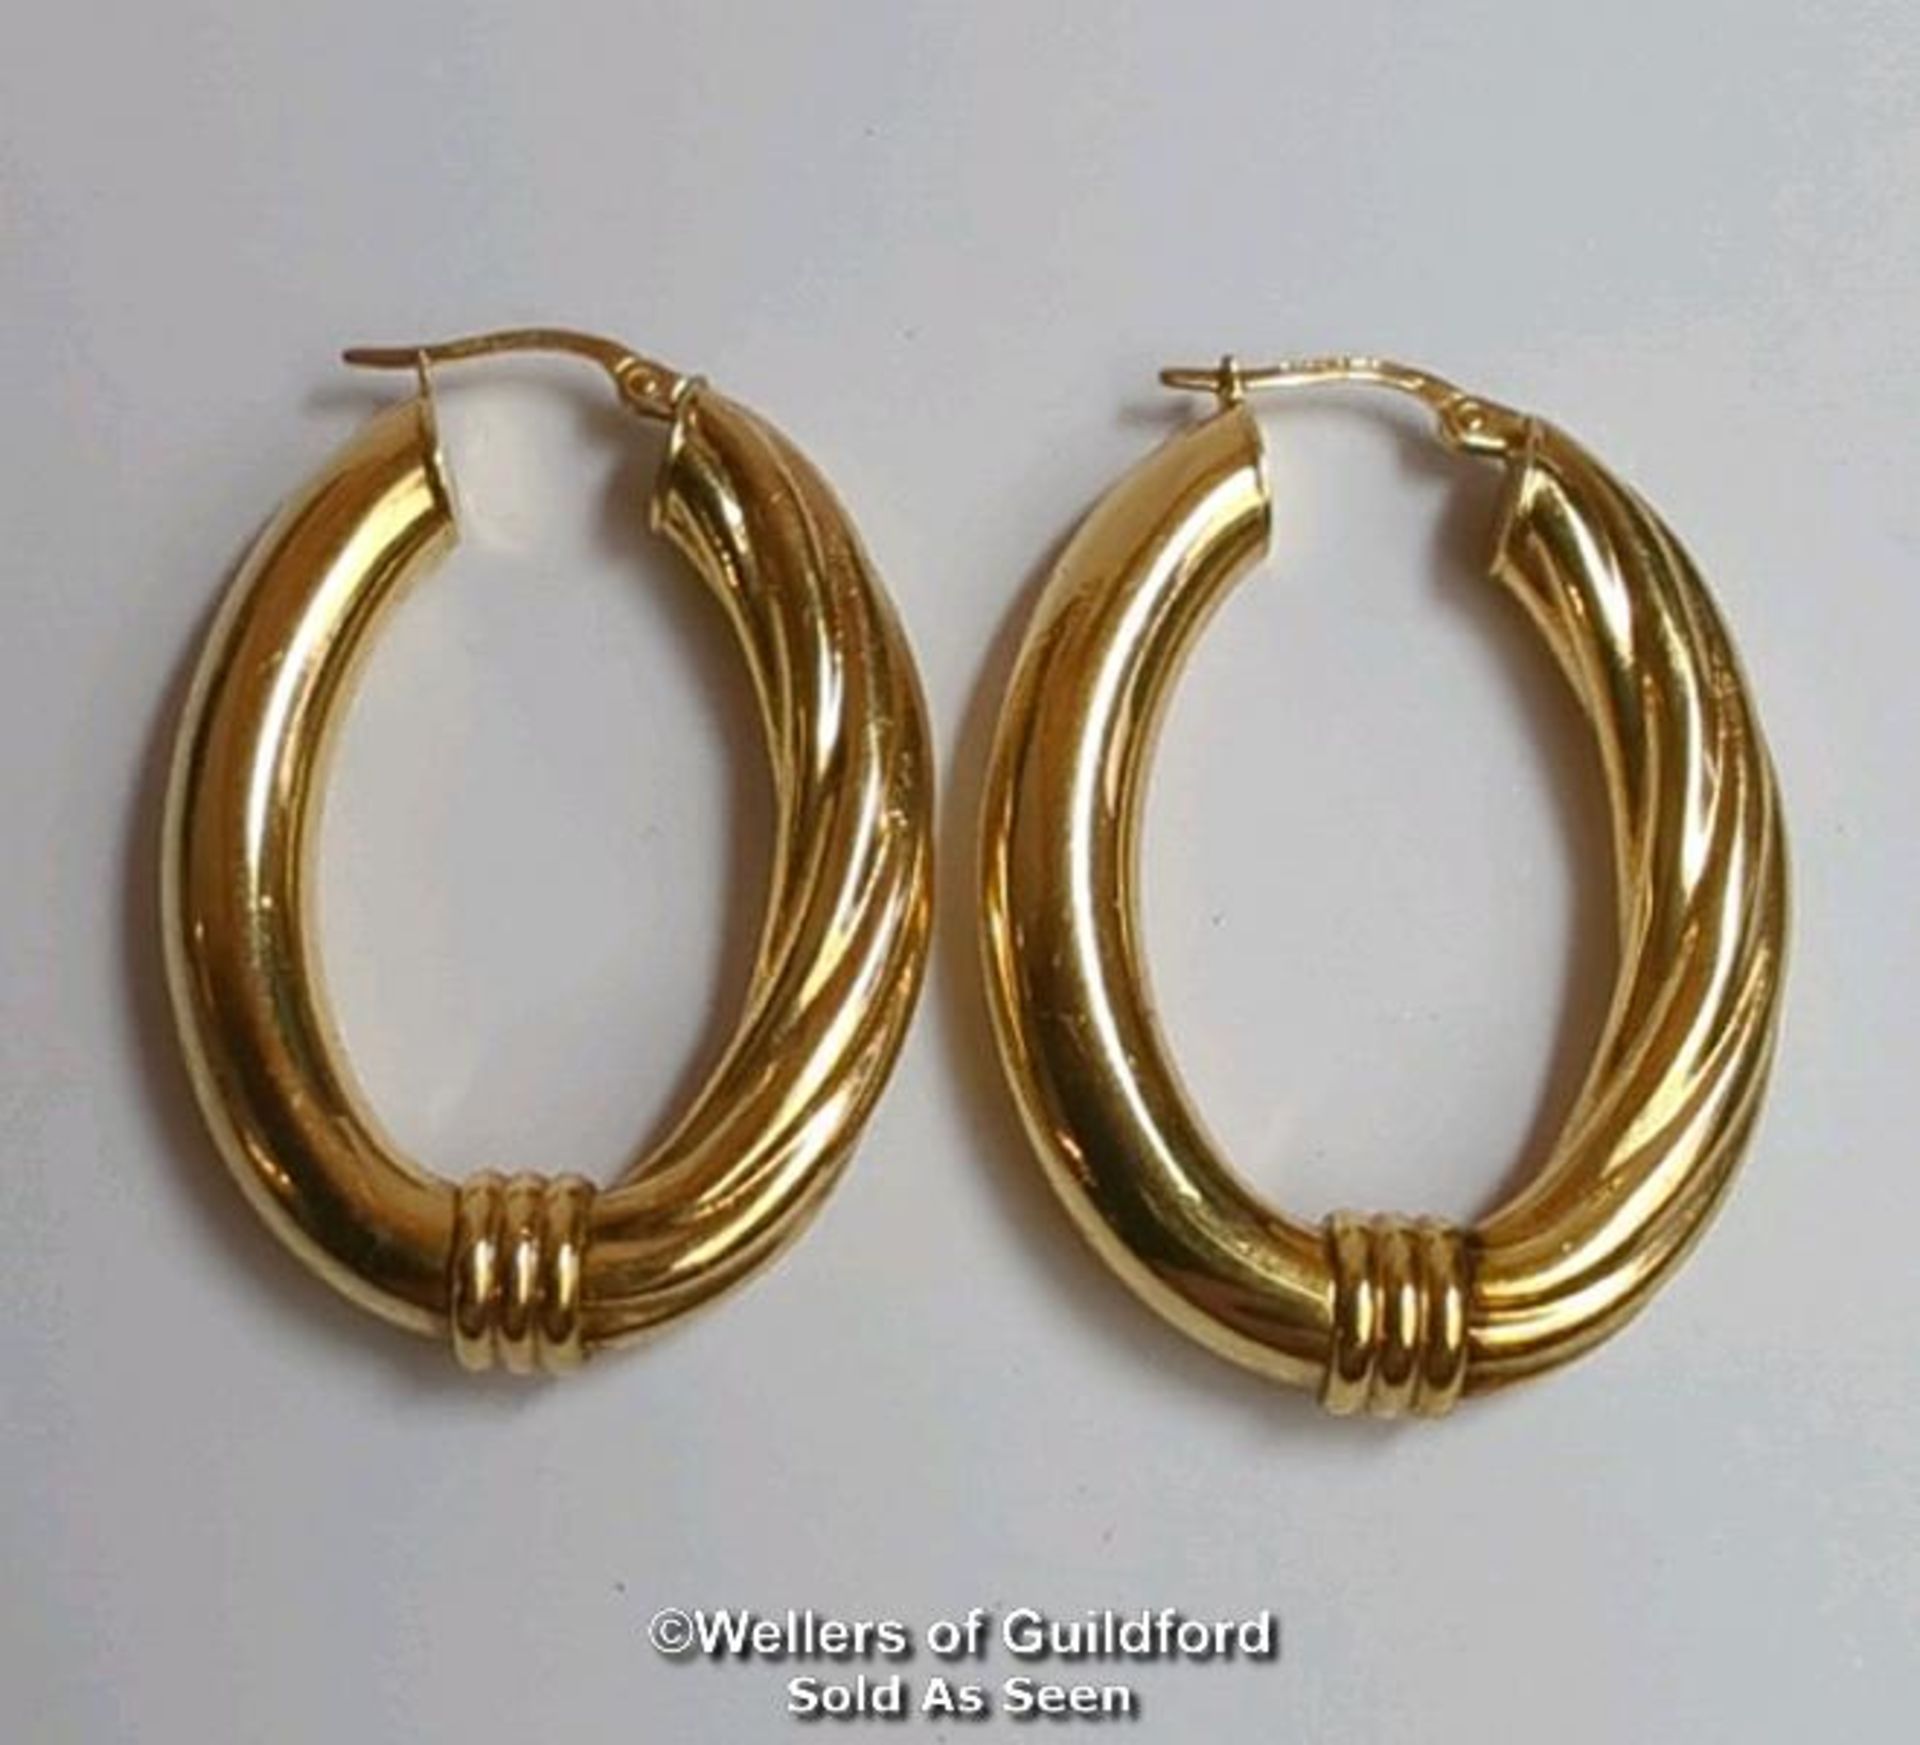 A pair of oval hoop earrings in hallmarked 9ct gold, length 4cm, gross weight 6.83g